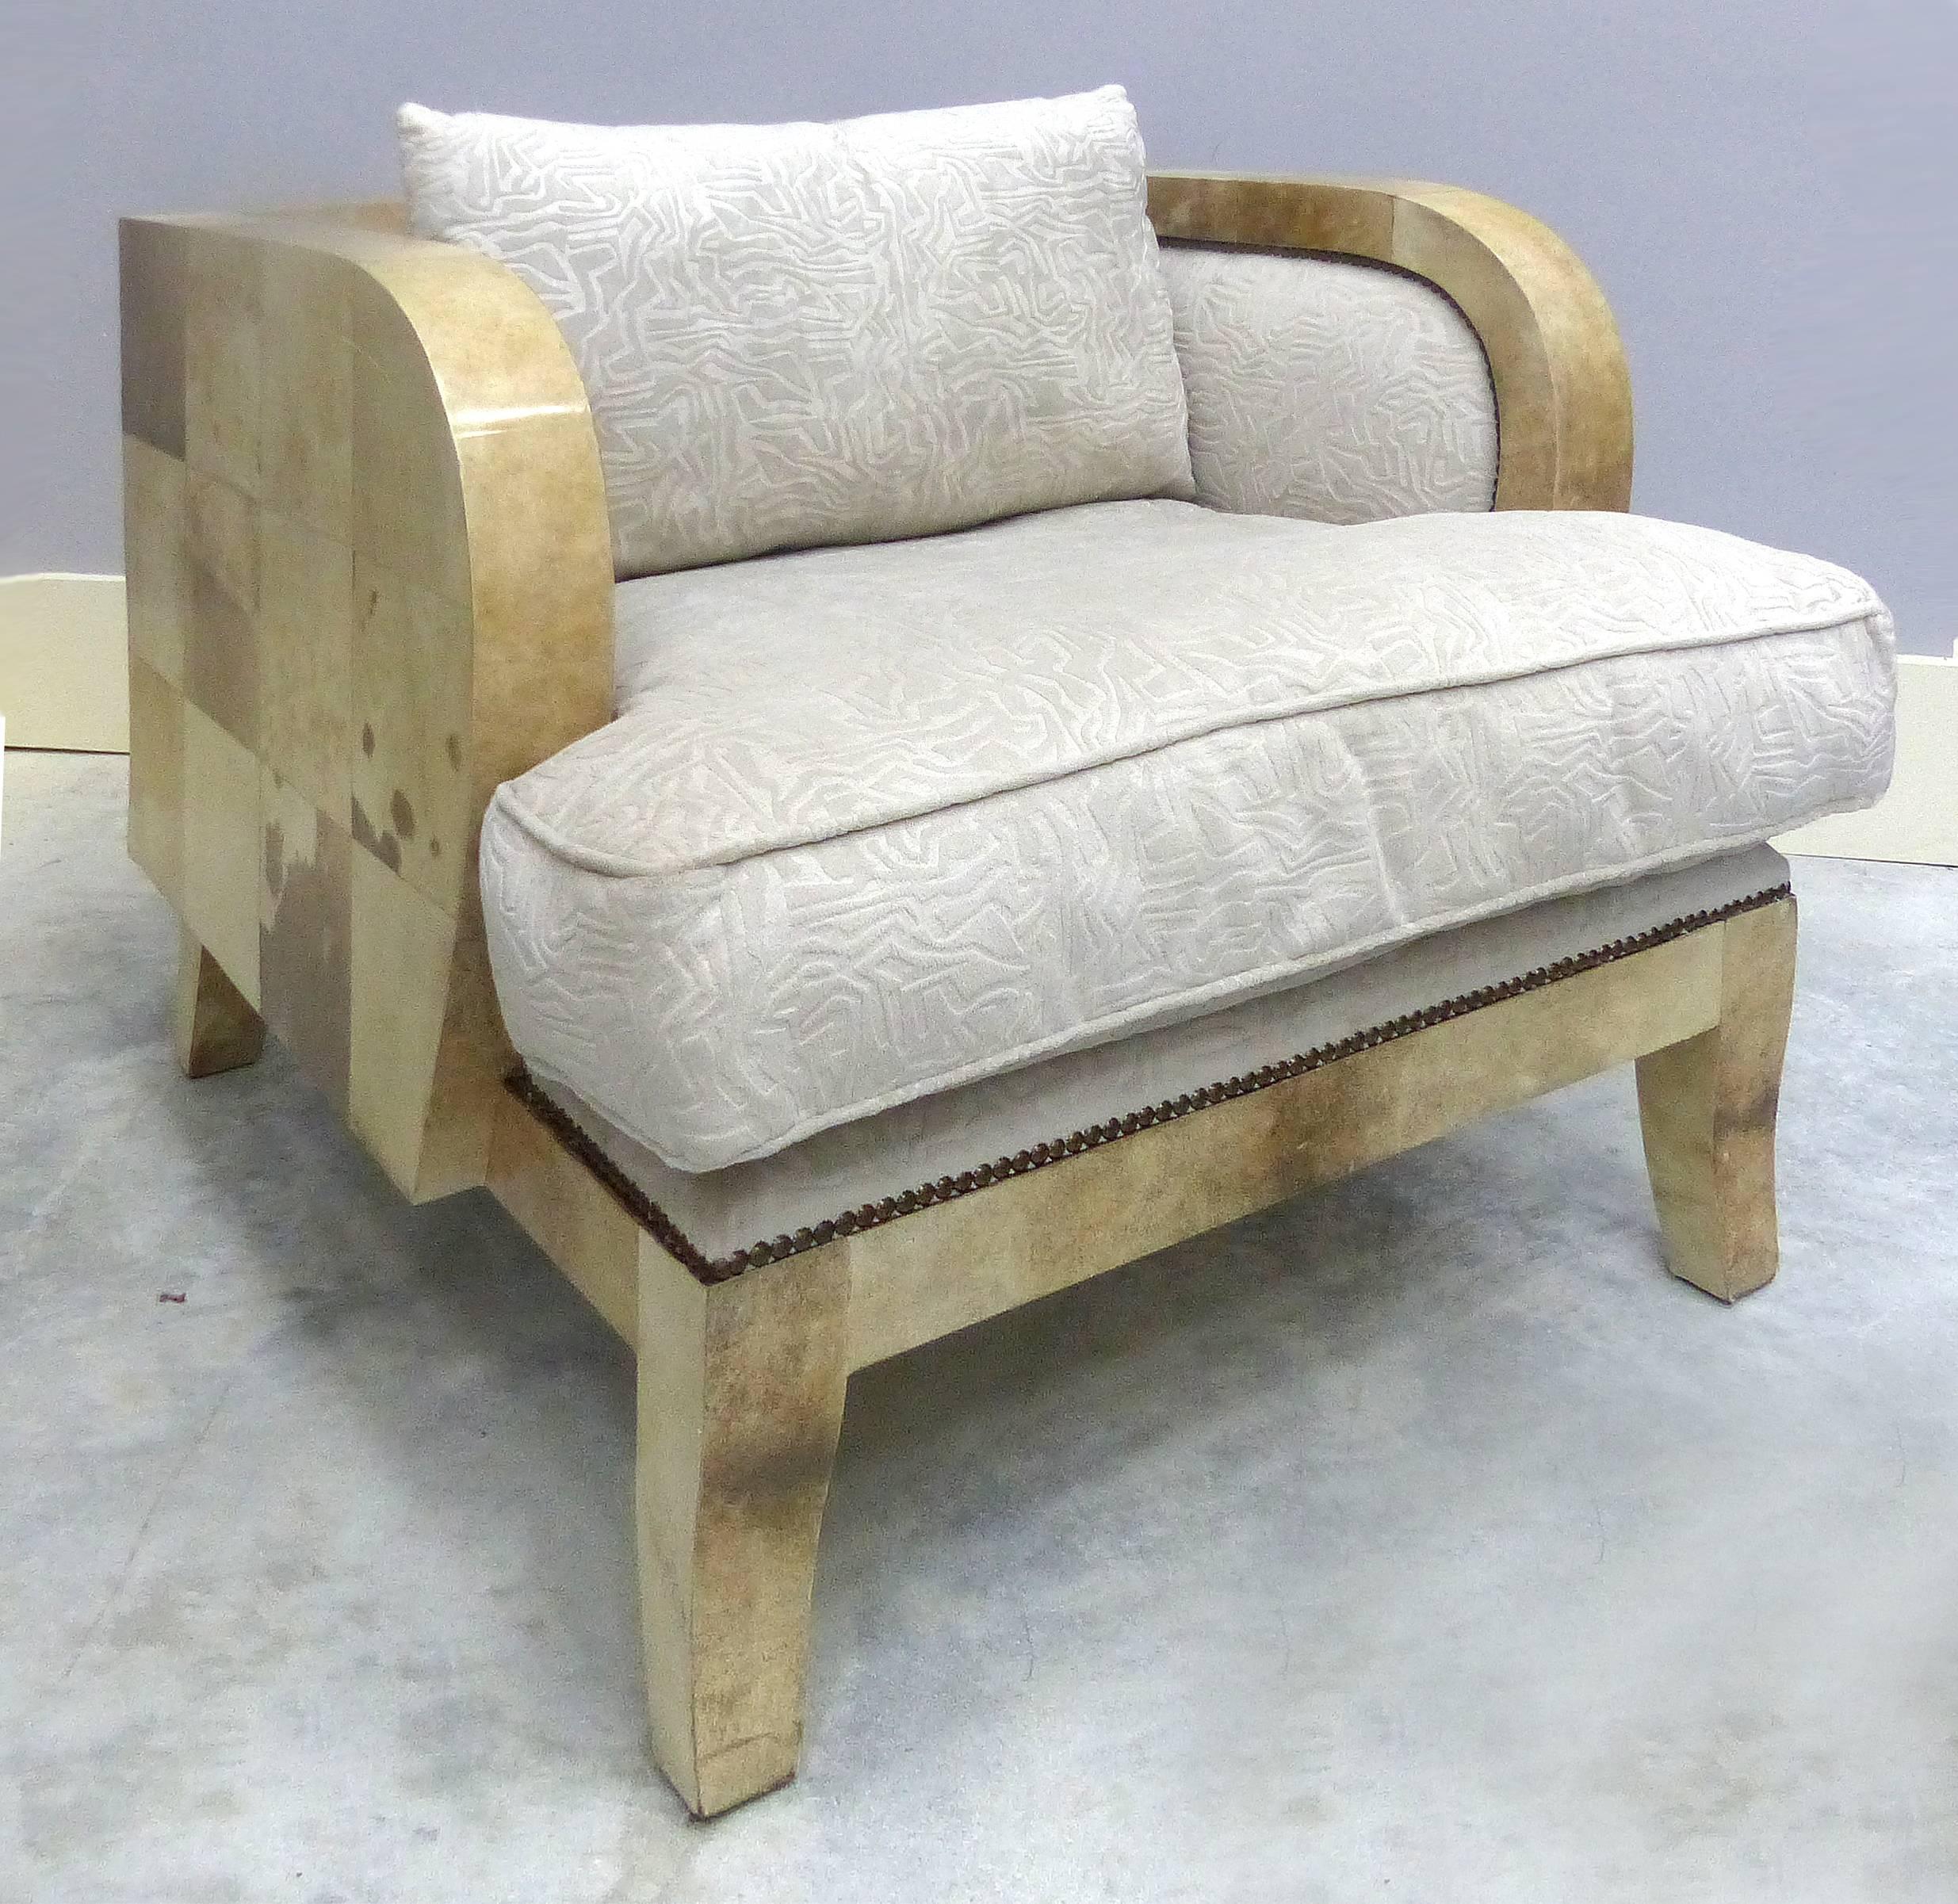 Art Deco Club Chairs Covered in Lacquered Goatskin

A comfortable pair of Art Deco club chairs covered in lacquered goatskin. Nicely upholstered in an off-white textured velvet fabric with brass nailheads. With loose seat and back cushions and